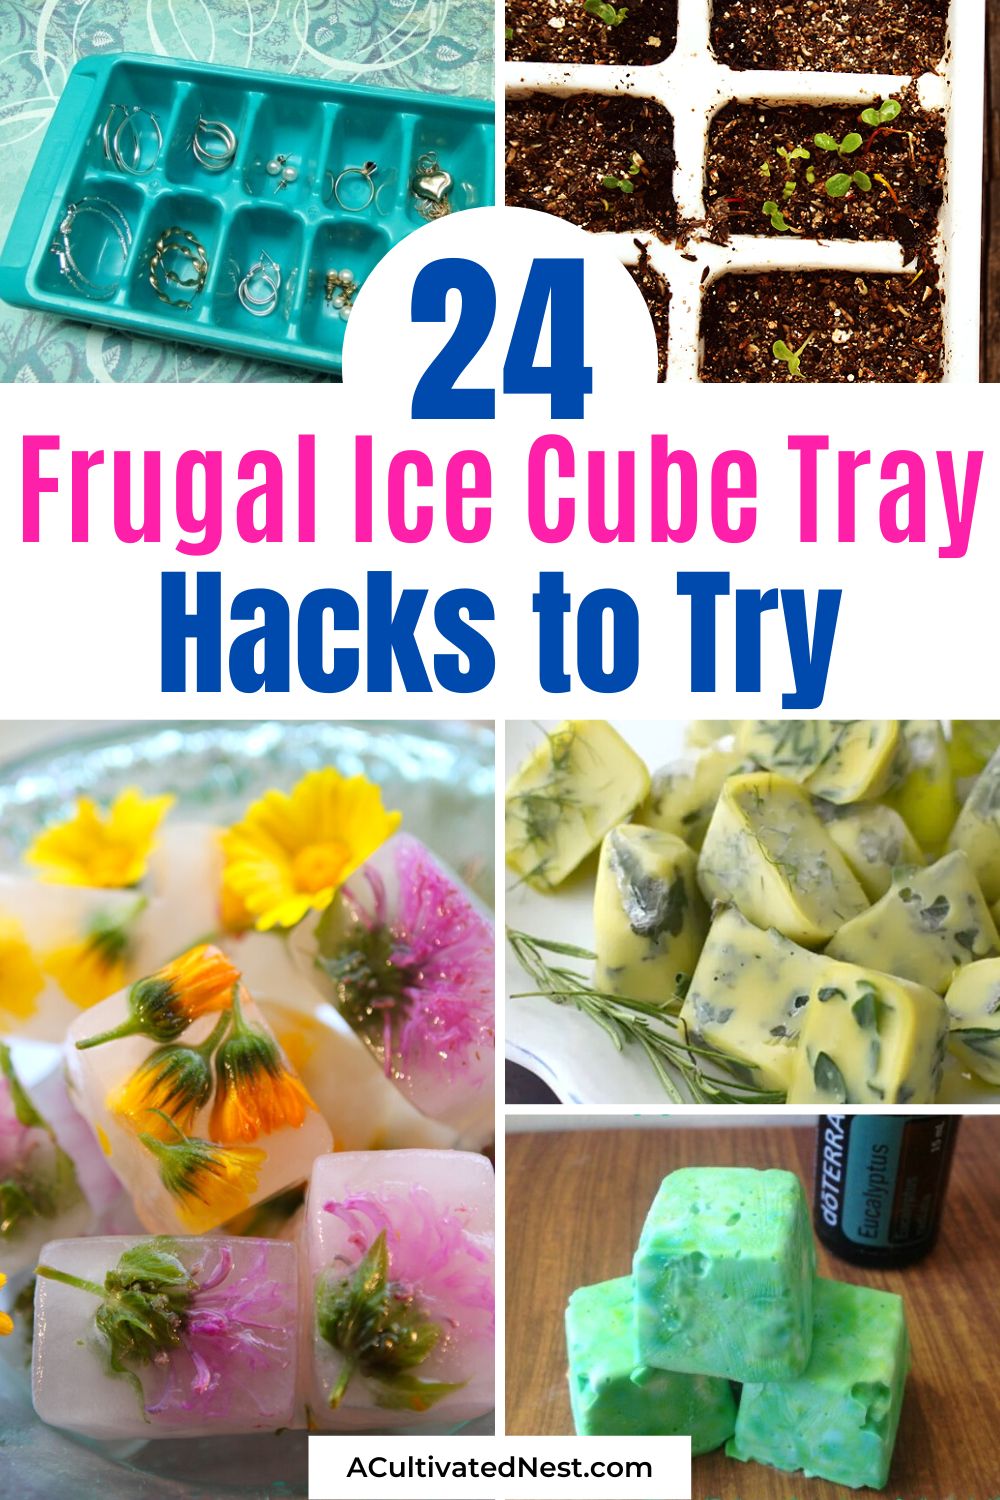 24 Frugal Ice Cube Tray Hacks- If you want a fun way to save money, organize easier, and make some fun foods, then you'll love these frugal ice cube tray hacks! | upcycle hacks, repurposing, repurposed ice cube trays, #frugalLivingHacks #moneySavingTips #frugalLivingTips #upcycling #ACultivatedNest